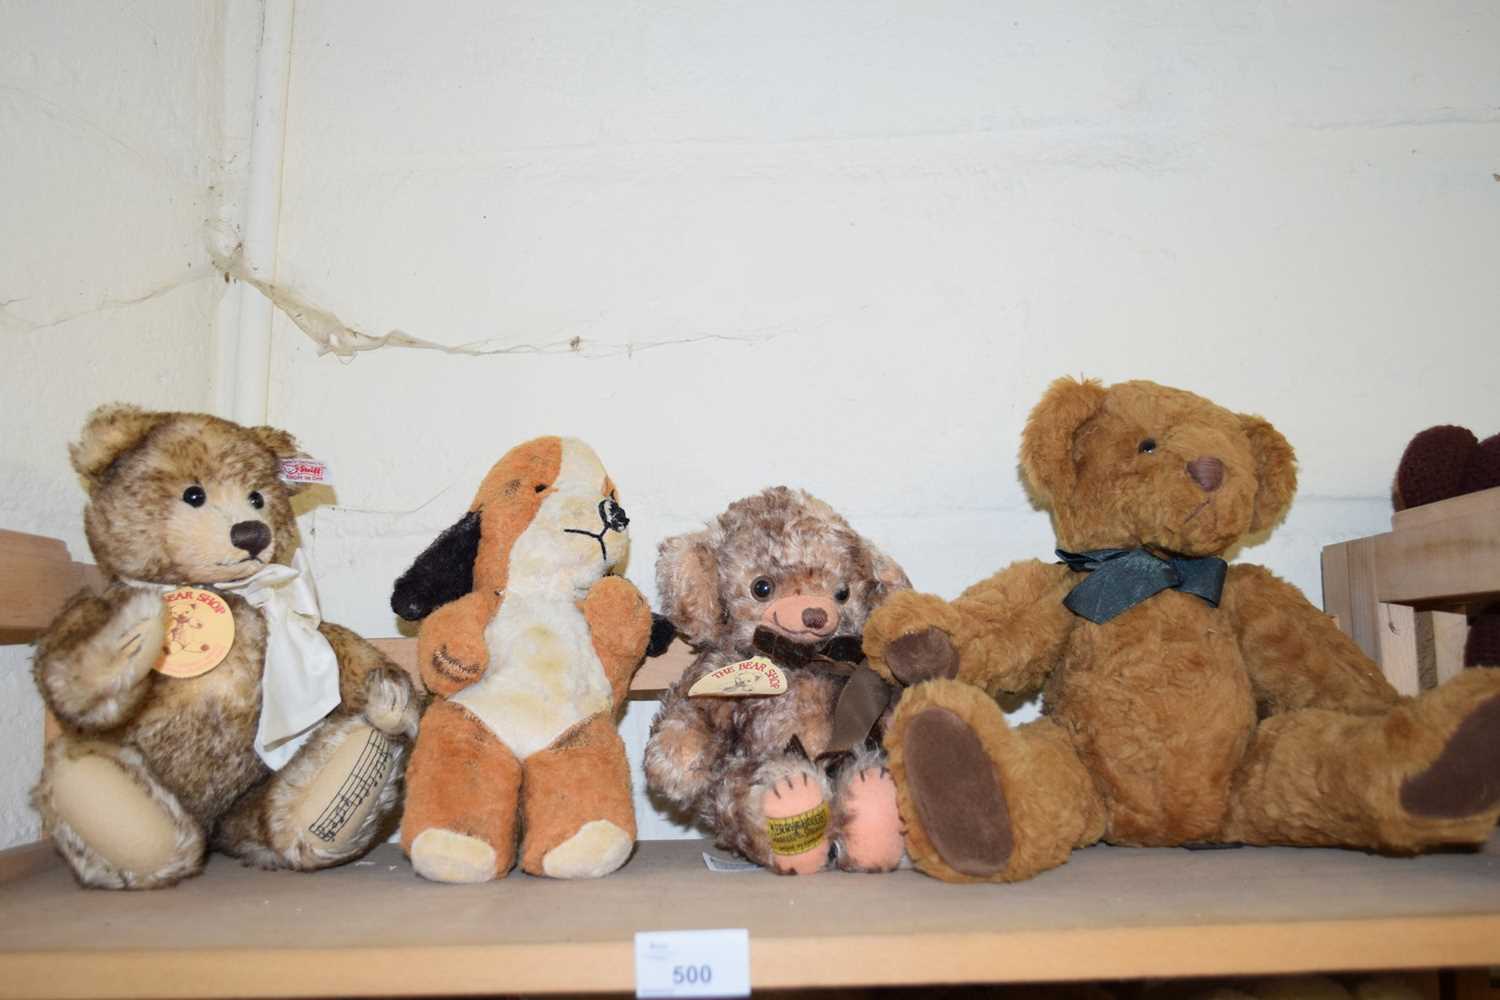 MIXED LOT COMPRISING SMALL MERRYTHOUGHT TEDDY BEAR, BEARING LABEL FOR 'THE BEAR SHOP', A SMALL